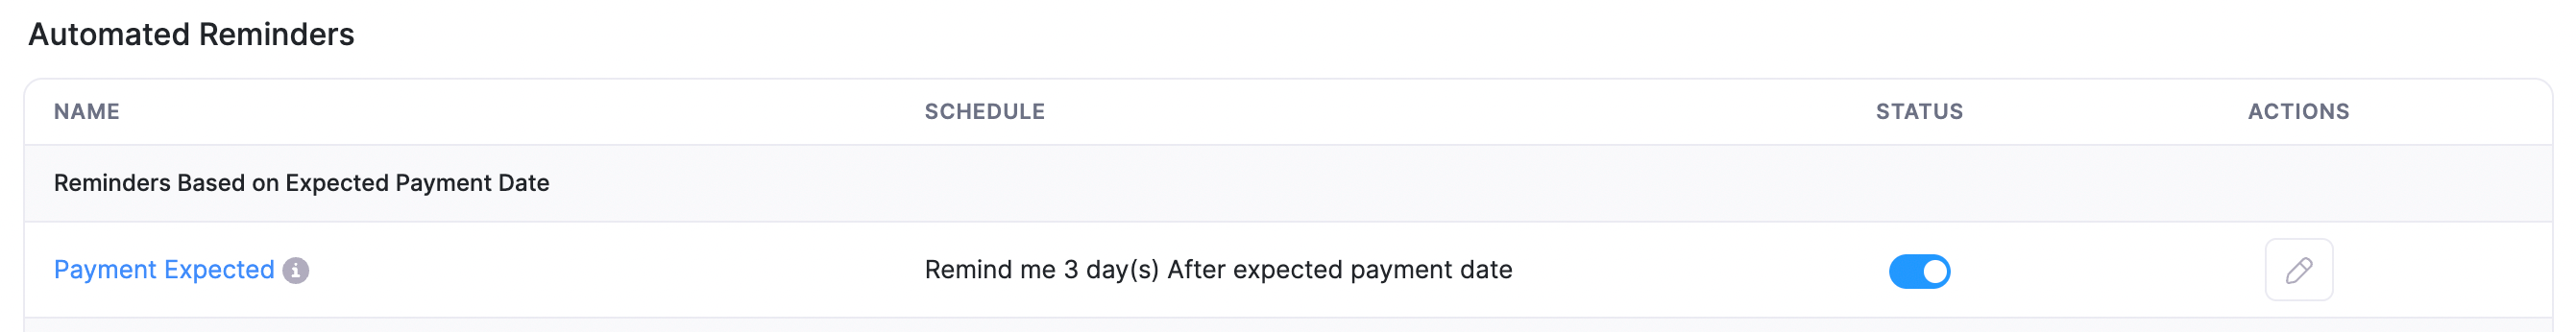 Set Reminder Based on Expected Payment Date